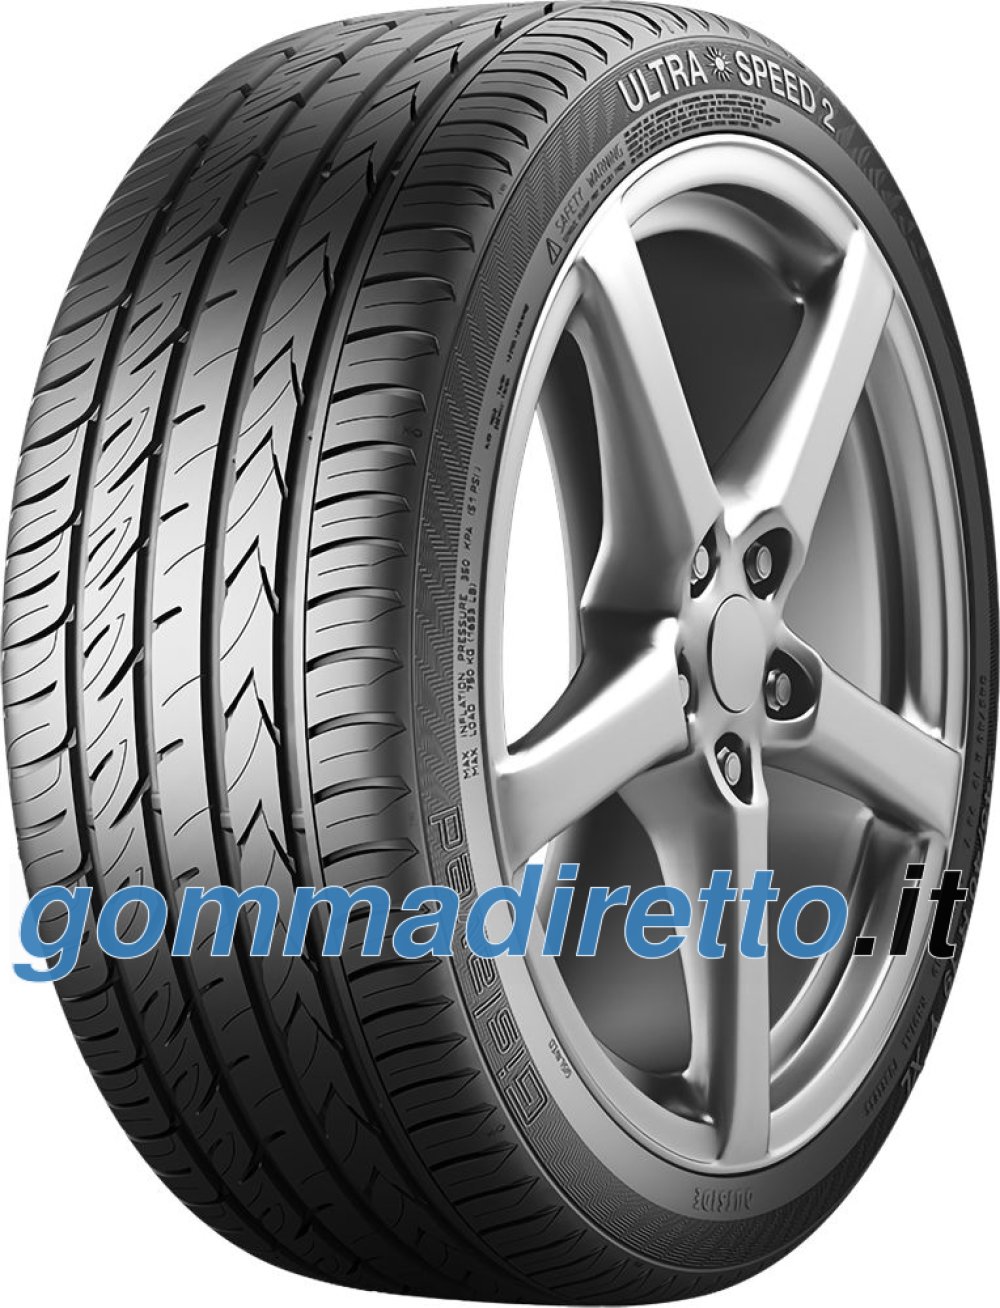 Image of        Gislaved Ultra*Speed 2 ( 195/65 R15 95T XL EVc )